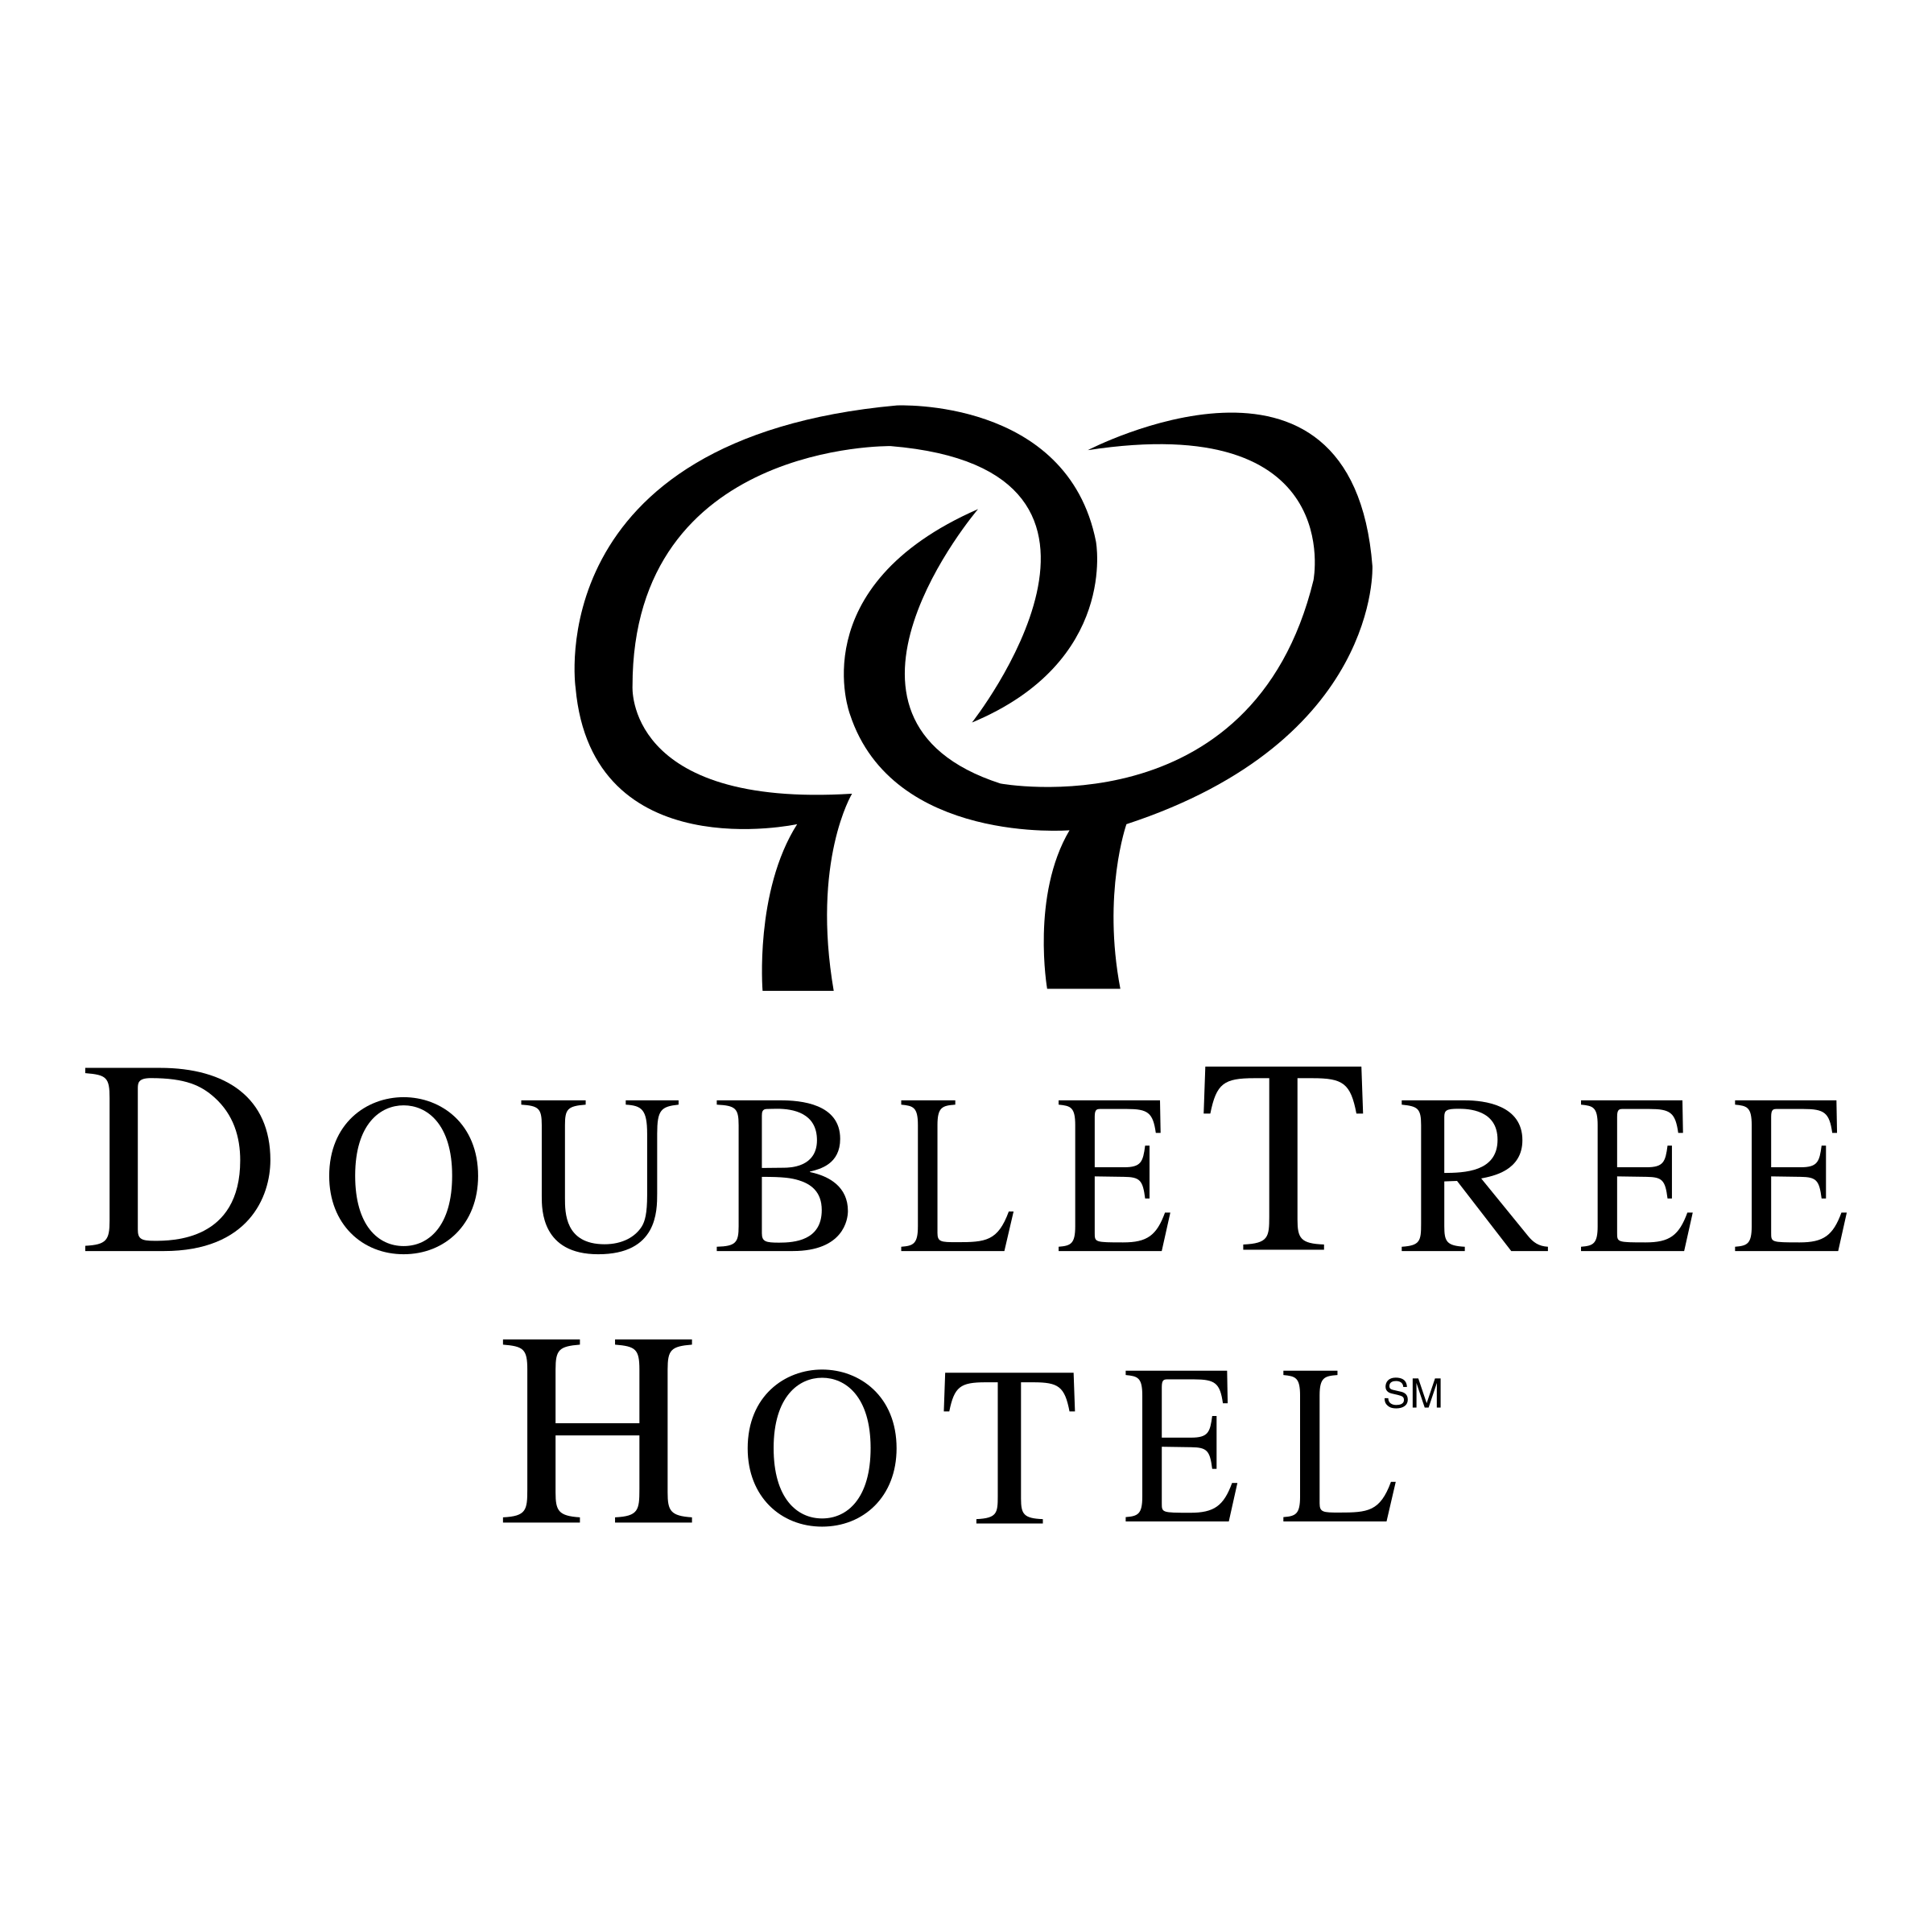 DoubleTree Logo - DoubleTree Hotel Logo PNG Transparent & SVG Vector - Freebie Supply